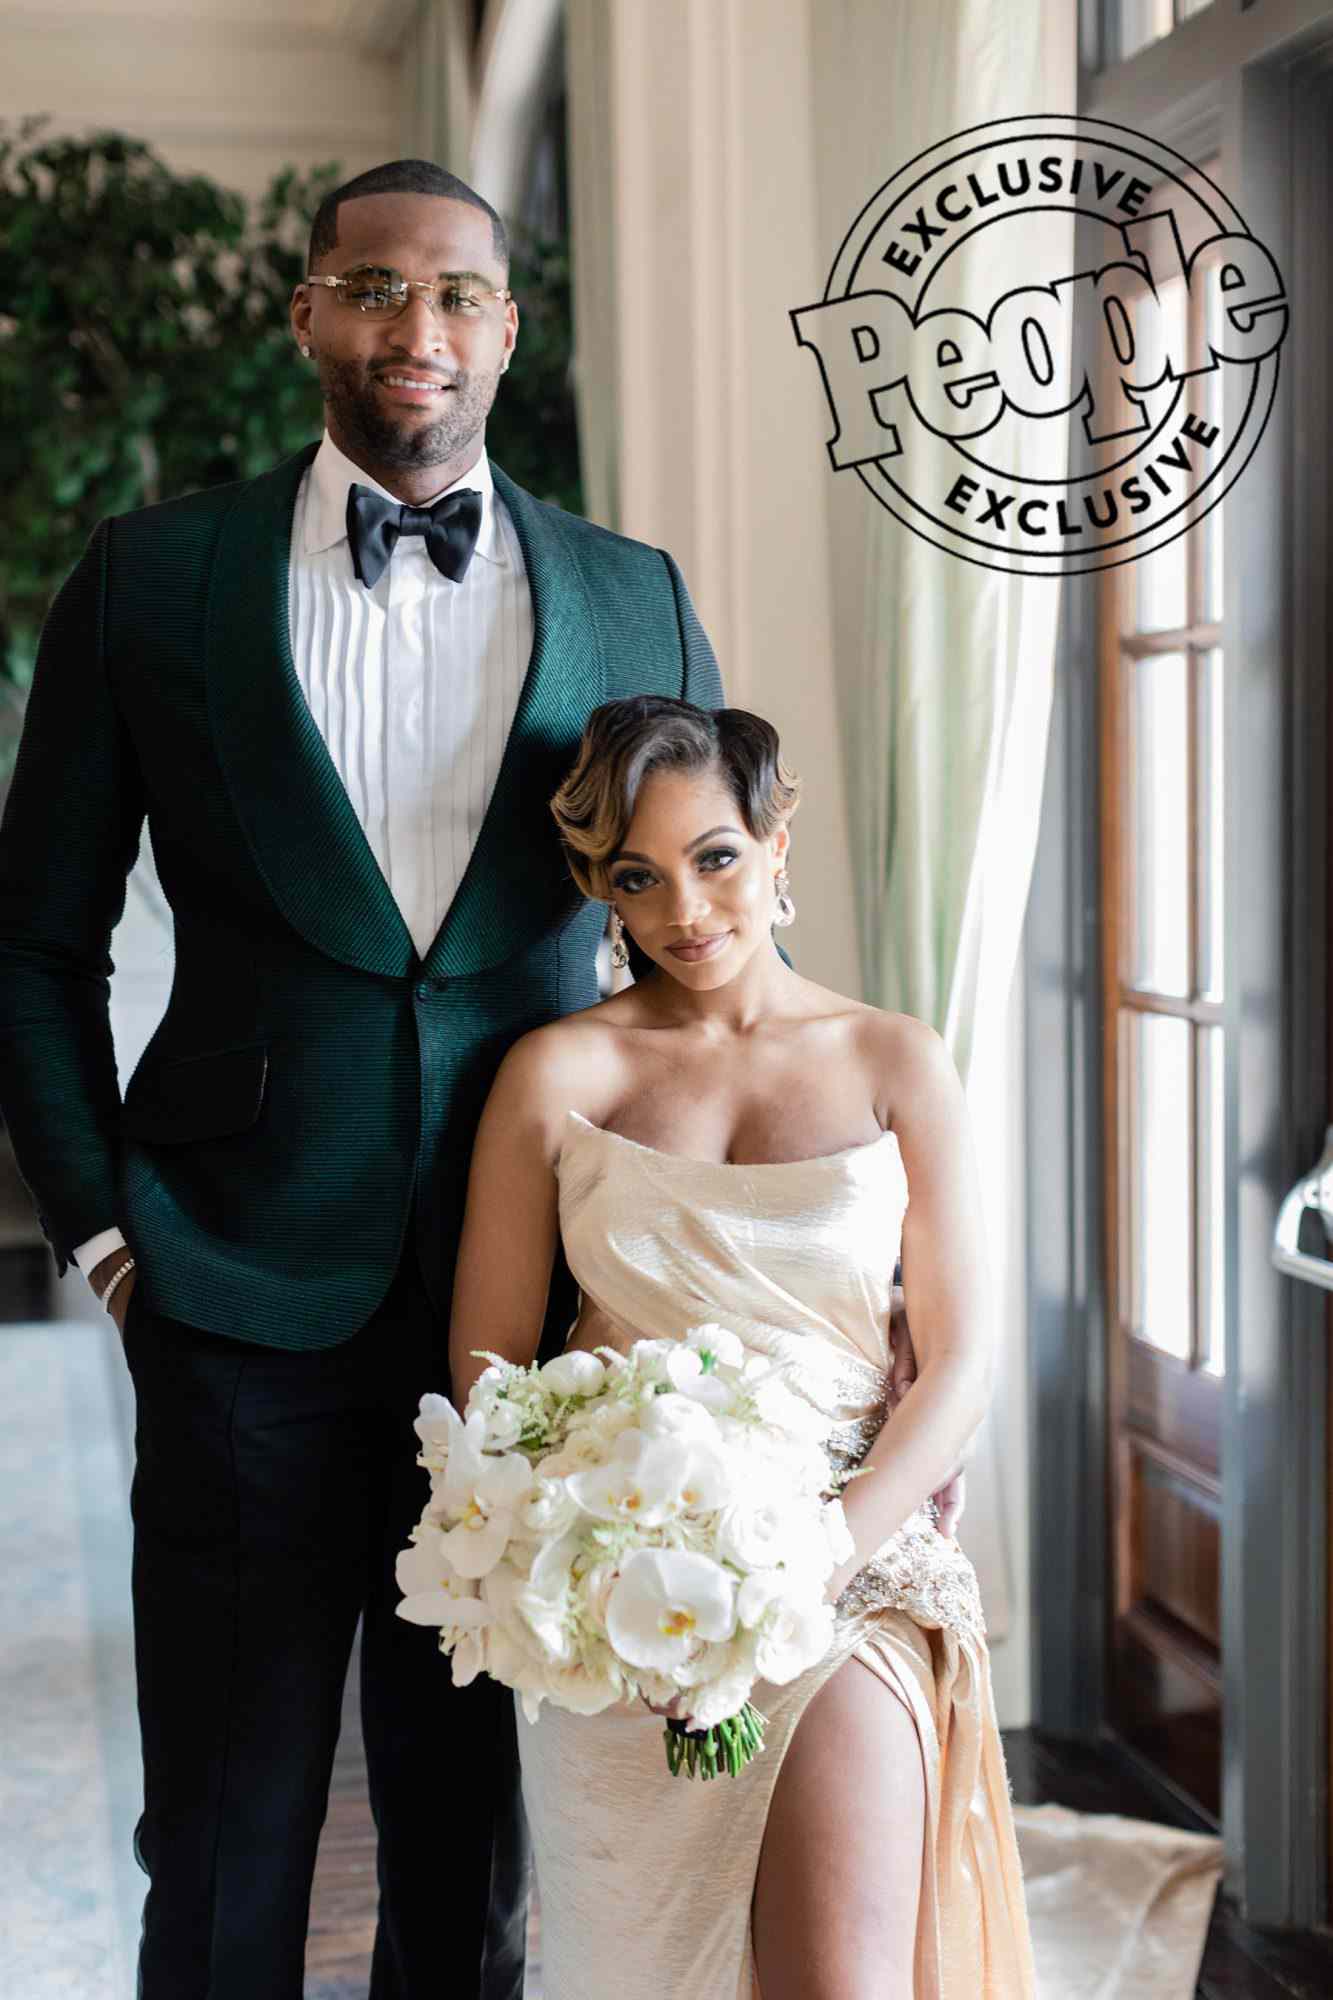 <p>The Los Angeles Lakers center wed his longtime girlfriend on Aug. 24 in a lavish Georgia ceremony at The St. Regis Atlanta.</p>
                            <p>"The entire event was amazing from TOP to Bottom&hellip; Literally," the couple told PEOPLE of the Lily V Events-planned wedding. </p>
                            <p>"We translated a millennial's interpretation of old Hollywood and what it would be like in current times using Morgan's love for flowers and ensuring the arrangements were just as towering as Demarcus," wedding planner Lynn Ehumadu of Lily V Events said. </p>
                            <p>Fellow NBA stars John Wall and Eric Bledsoe took part as groomsmen, and several former Golden State Warriors teammates and current Lakers teammates were in attendance. </p>
                            <p>Just one week after the ceremony, police issued an arrest warrant for Cousins on accusations that he assaulted his ex-girlfriend when she told him their 7-year-old son, Amir, would not be attending his wedding. </p>
                            